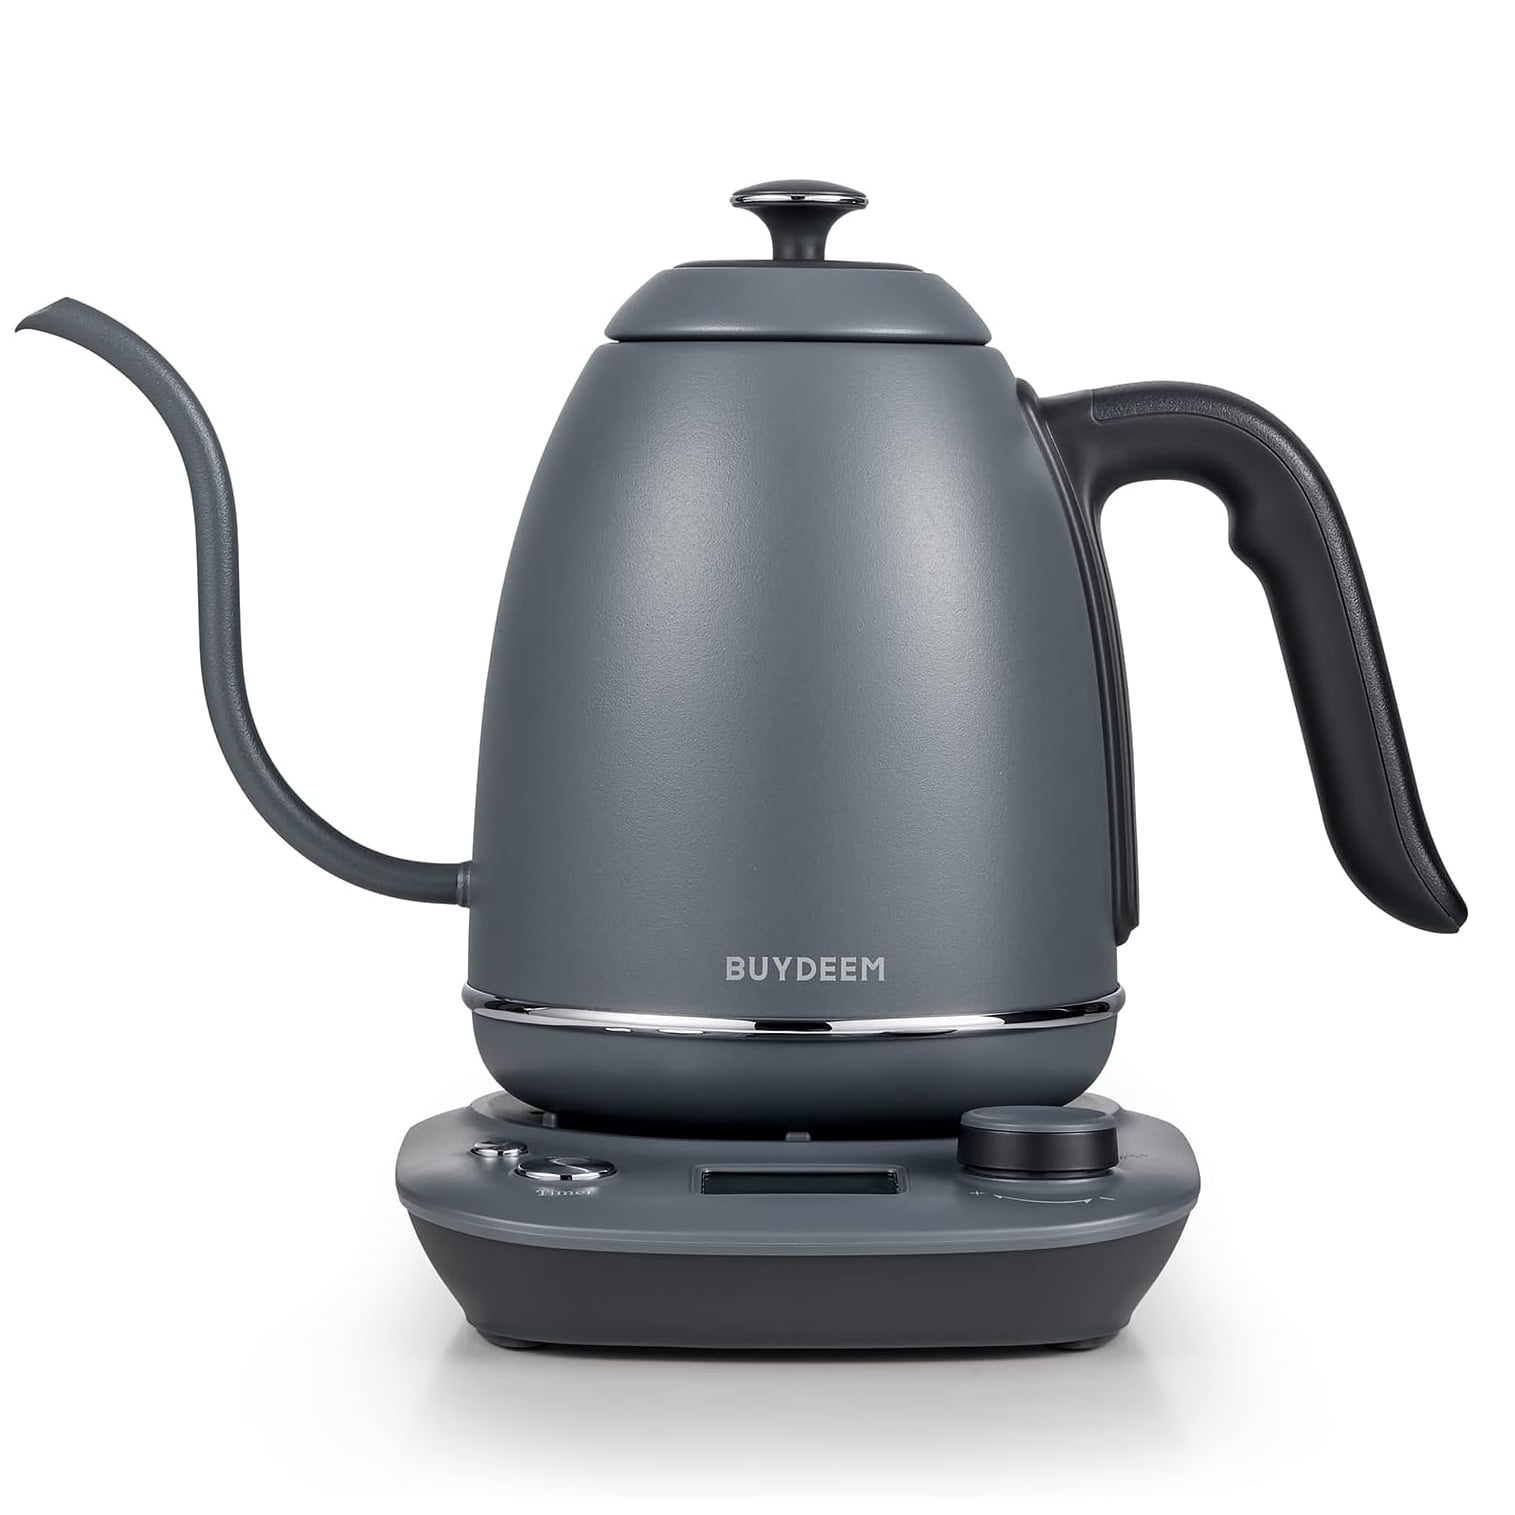 New in Box) Gooseneck Kettle with temperature control, ultra fast boiling electric  kettle for coffee/tea, 100% stainless steel, 5 variable presets, l for Sale  in Sugar Land, TX - OfferUp